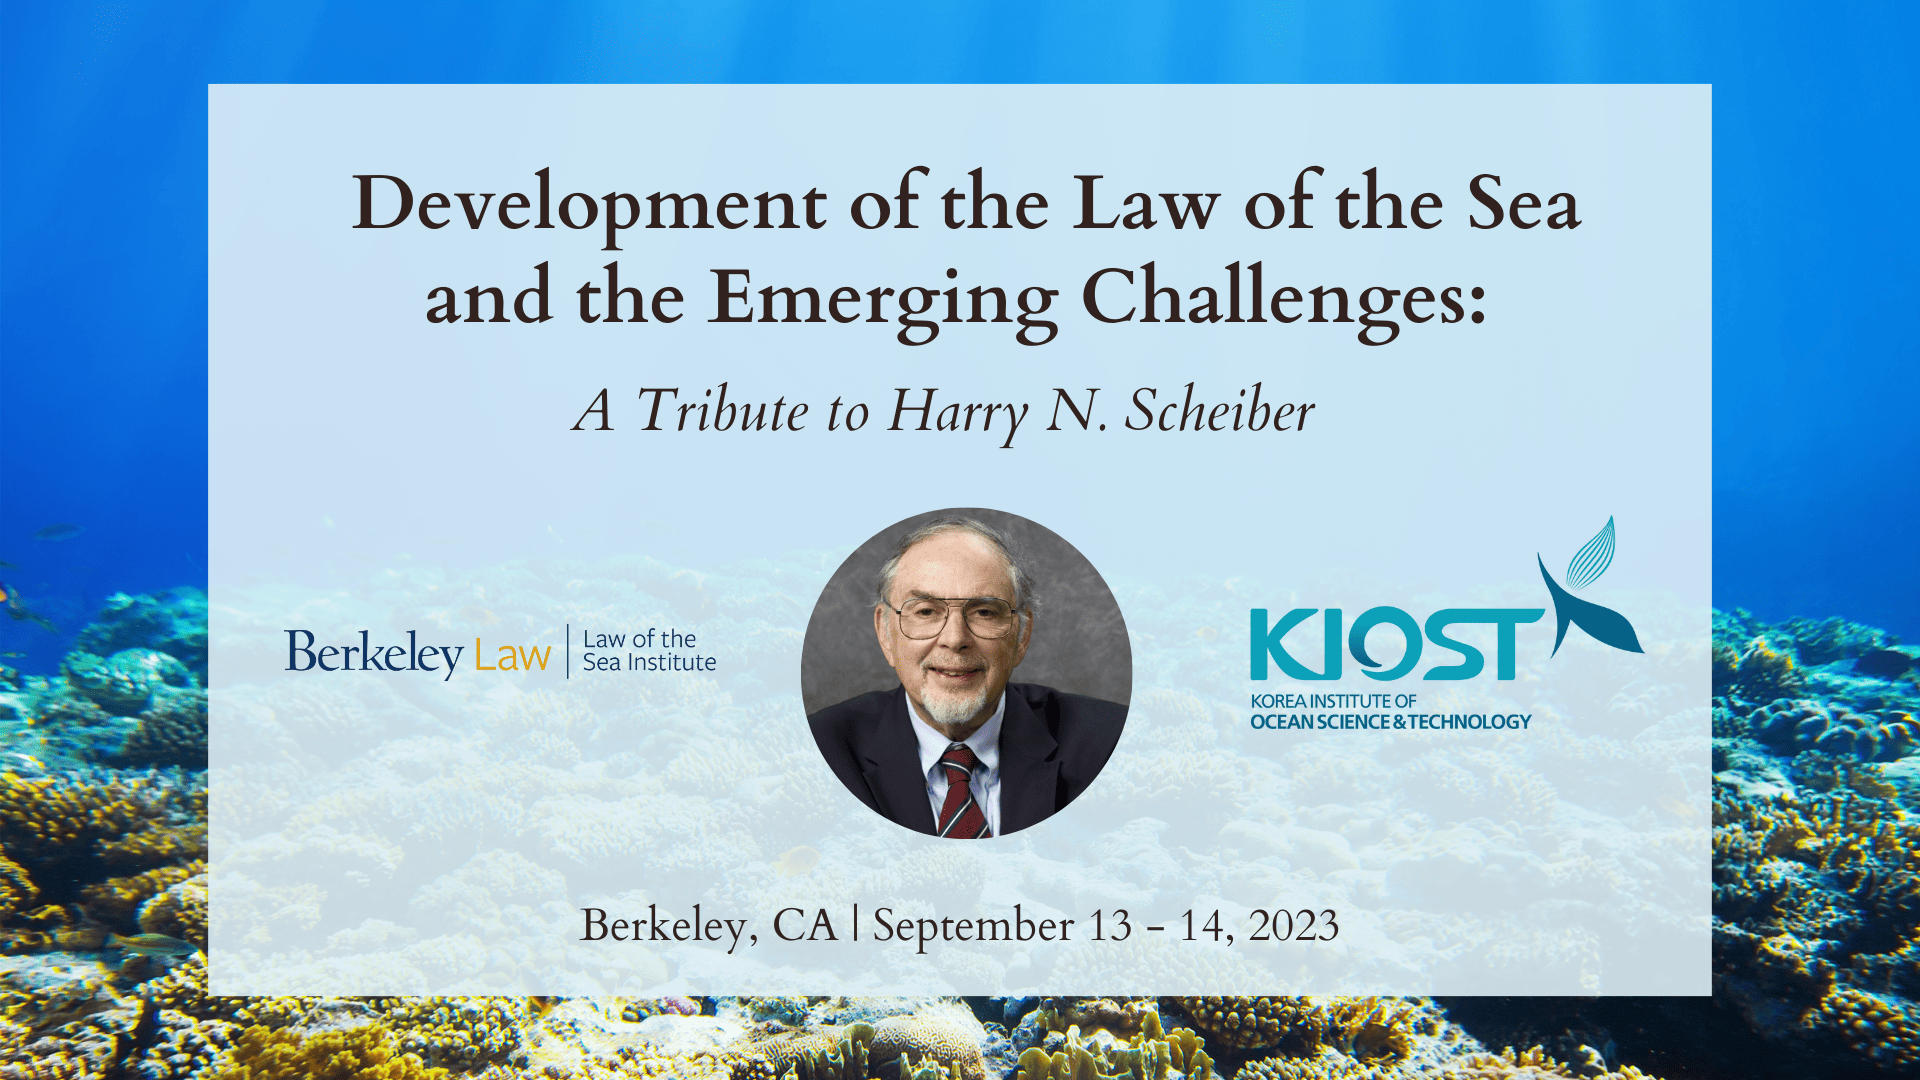 Event flyer with ocean background and headshot of Harry Scheiber. Titled \\\'Development of the Law of the Sea and the Emerging Challenges: A Tribute to Harry N. Scheiber\\\' with event details (listed above).